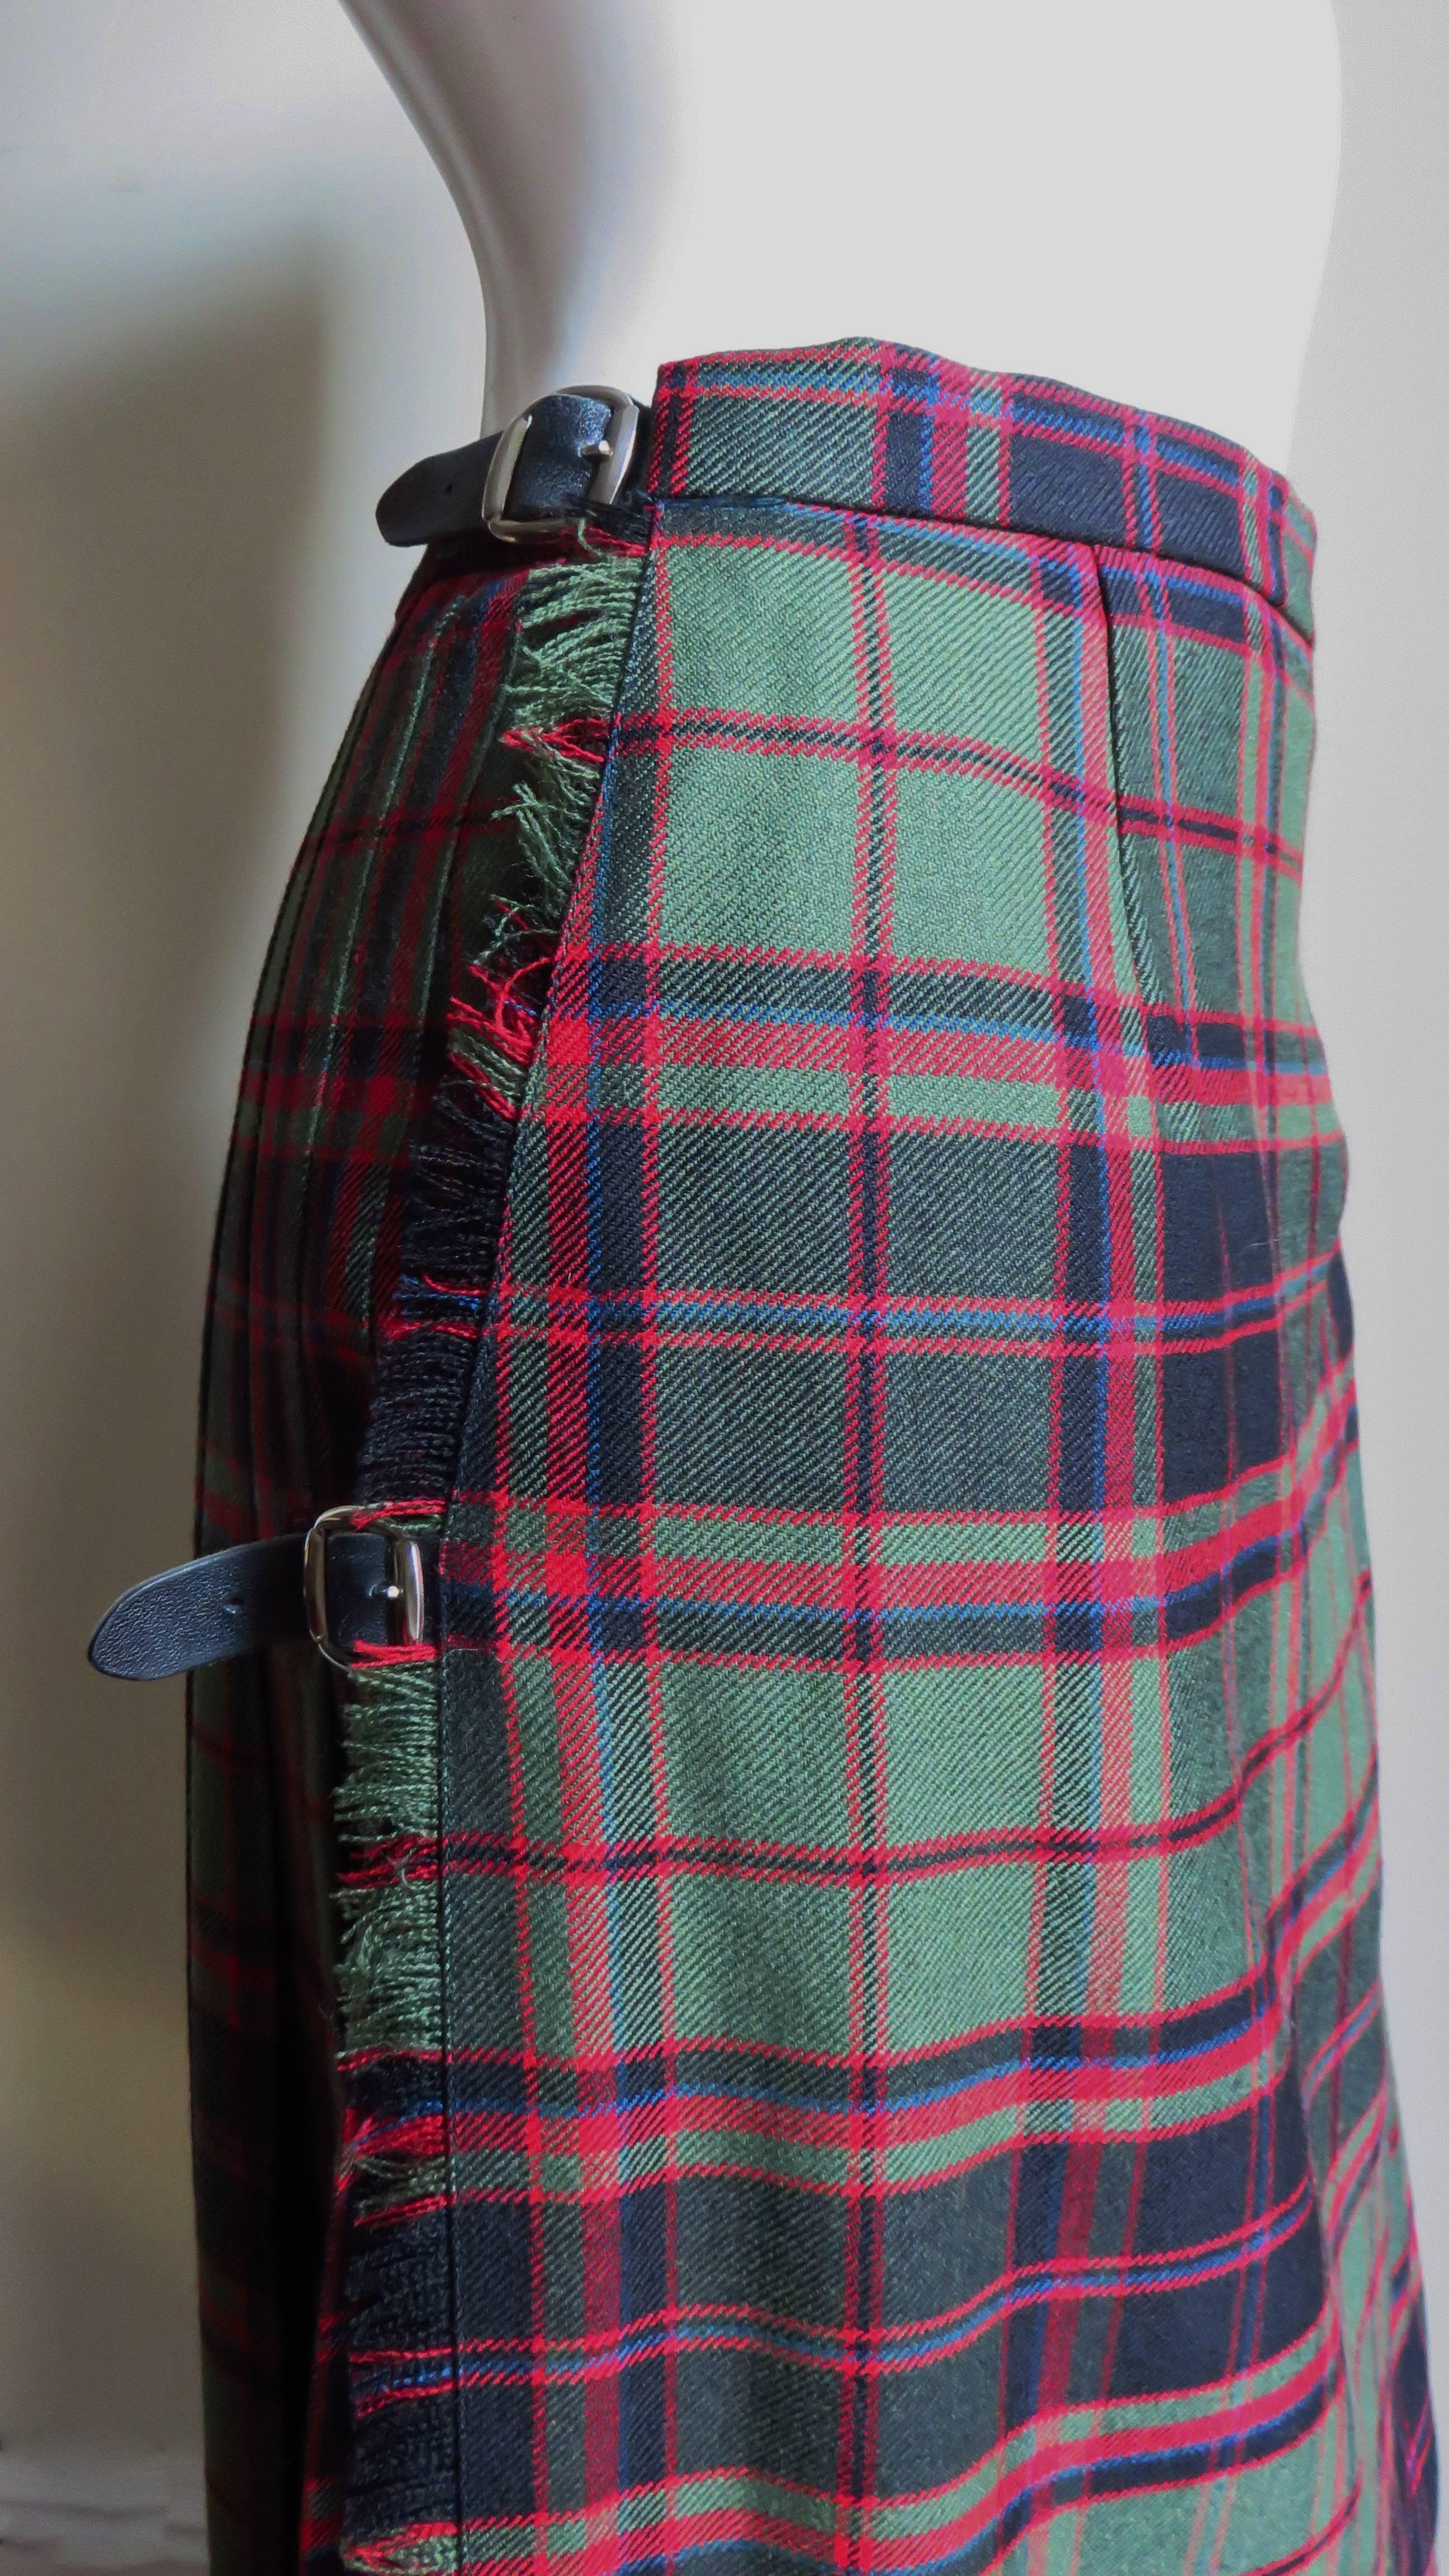 A fabulous plaid wool maxi kilt in festive holiday colors of red and green with  black.  It is a traditional kilt style with a fitted waistband including adjustable side leather belts, a wrap flat front with a side pin and a pleated back.  It is